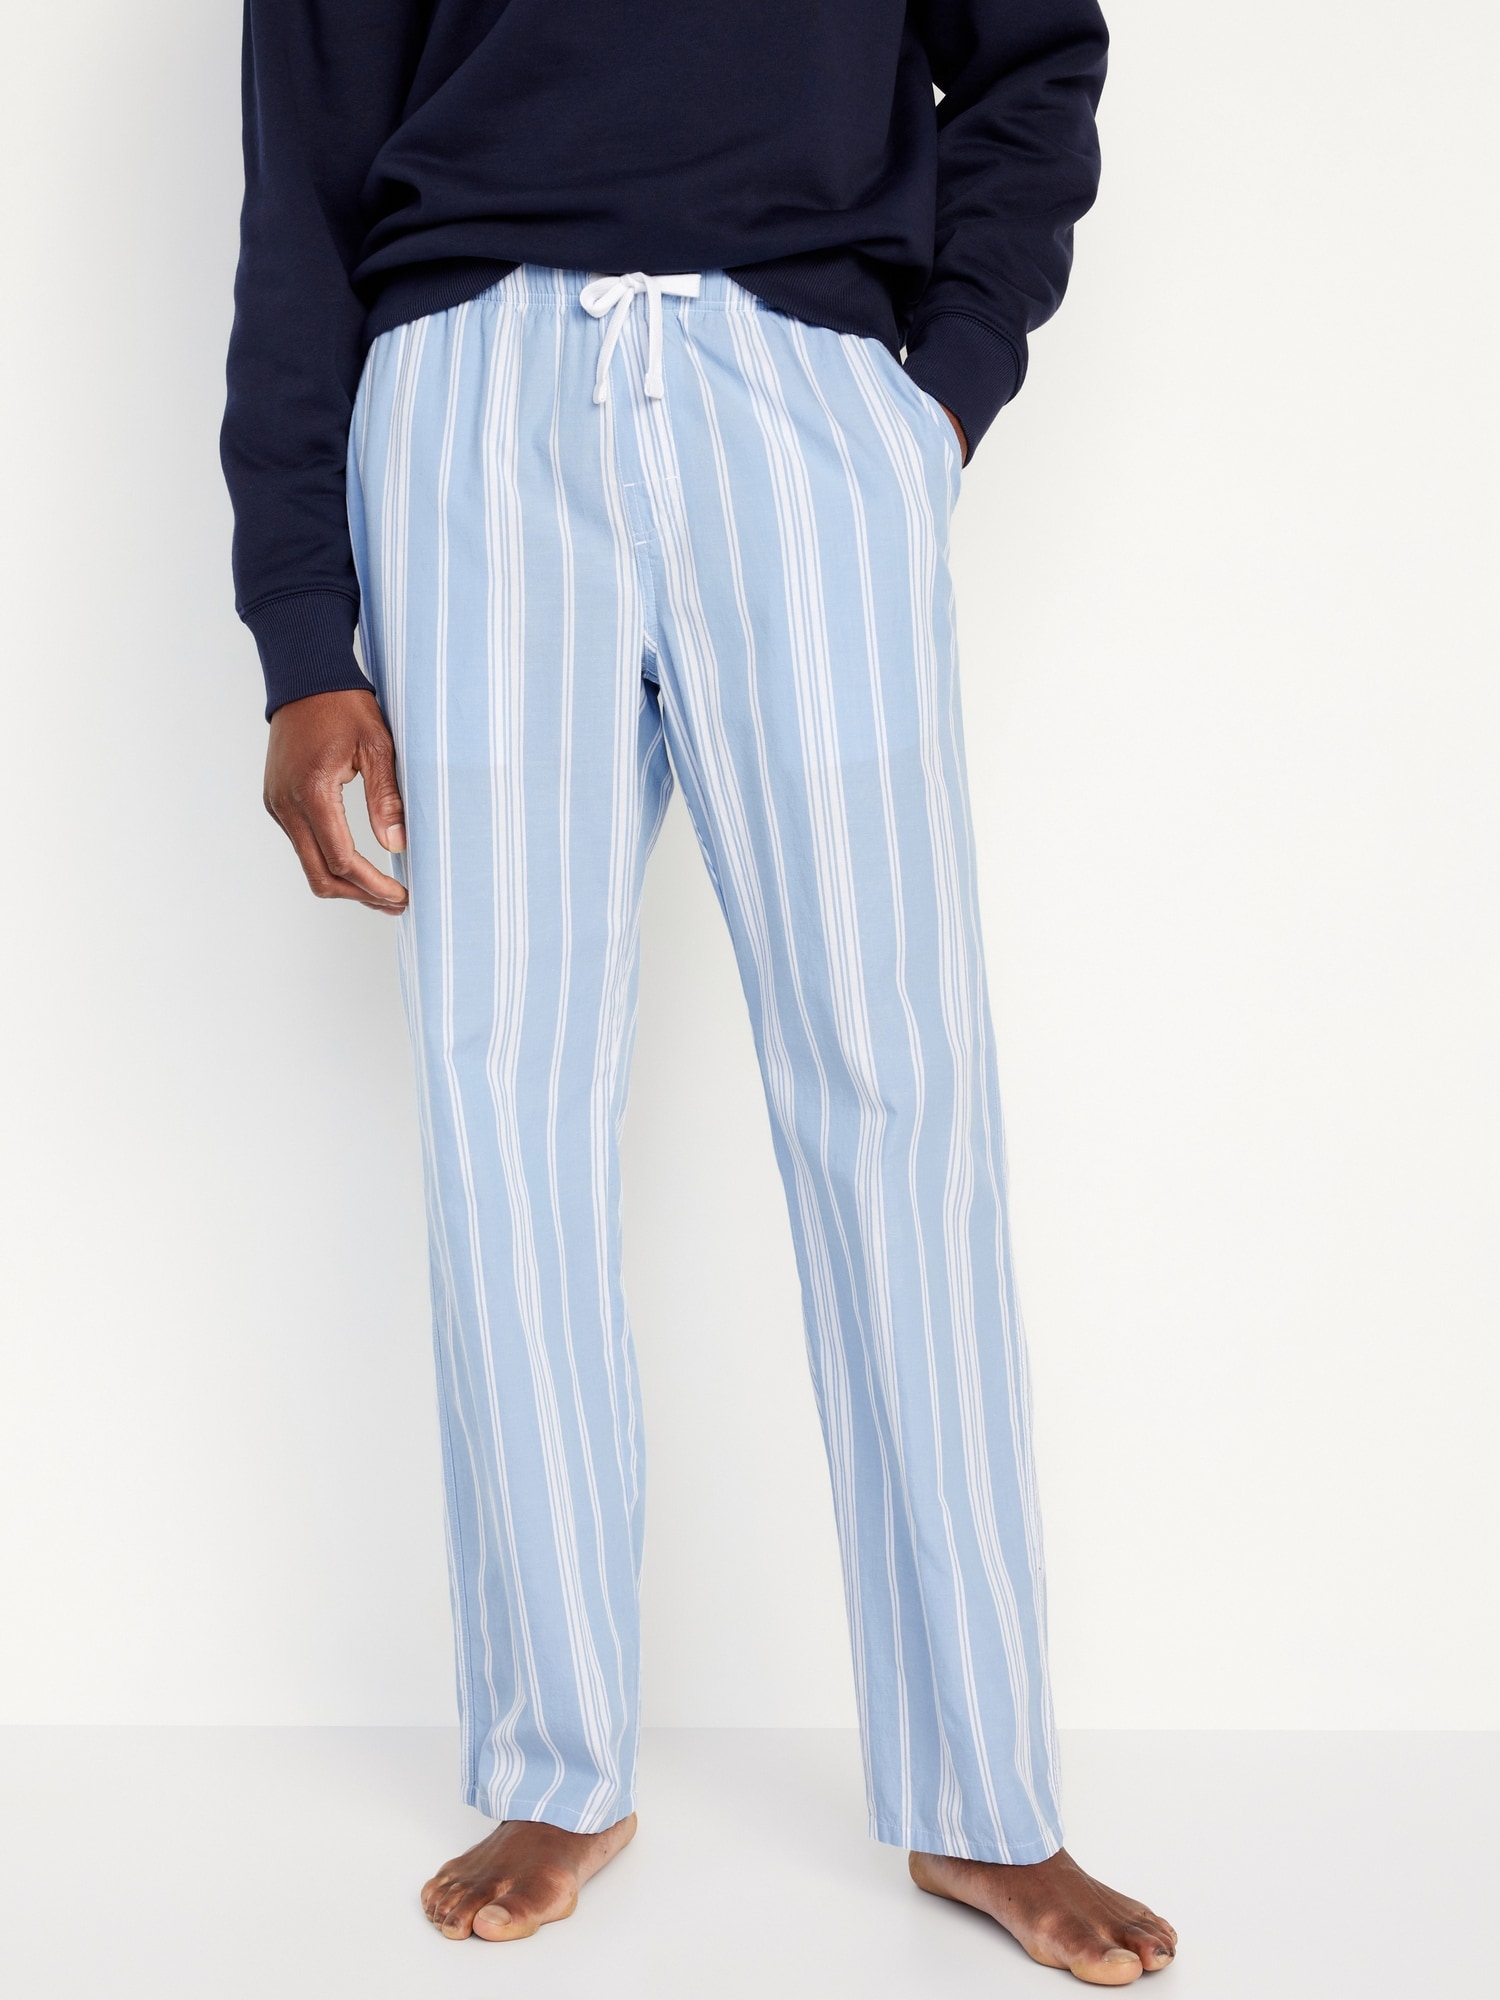 Old Navy Pajama Pants Only $5 (Regular up to $24.99) - Today Only!